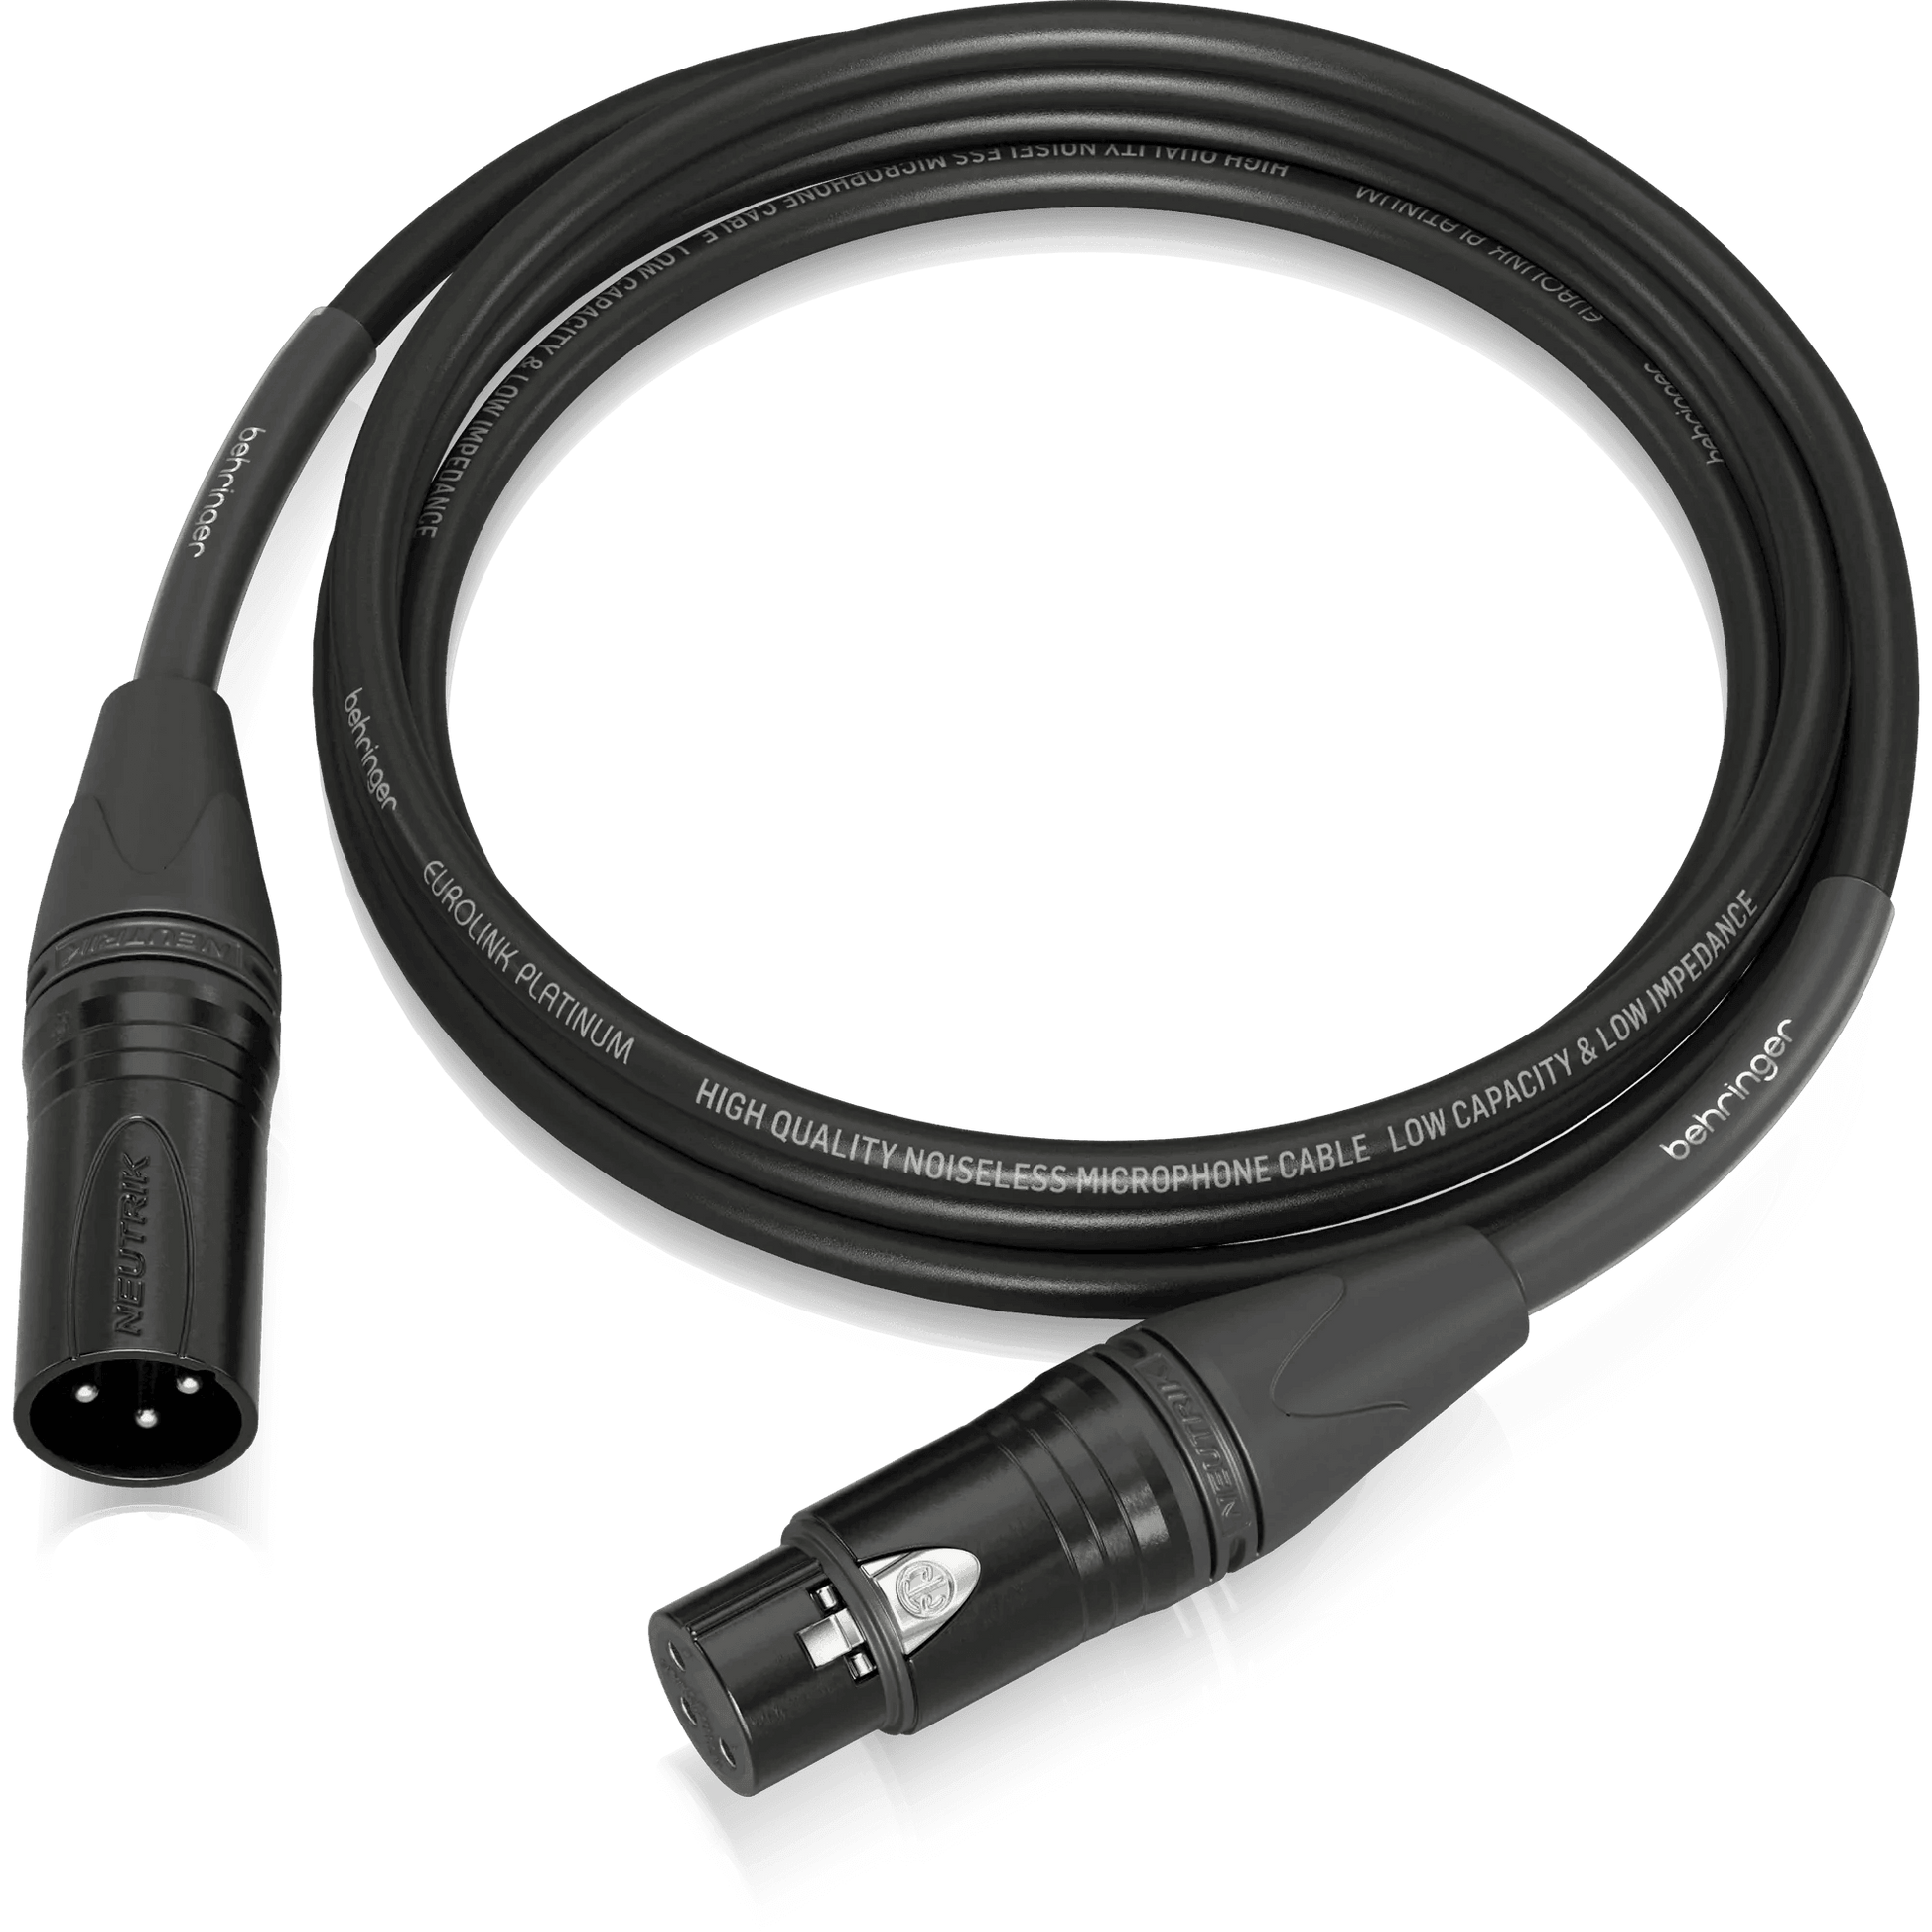 Behringer PMC-300 Platinum Performance 3 m (10 ft) Microphone Cable with XLR Connectors